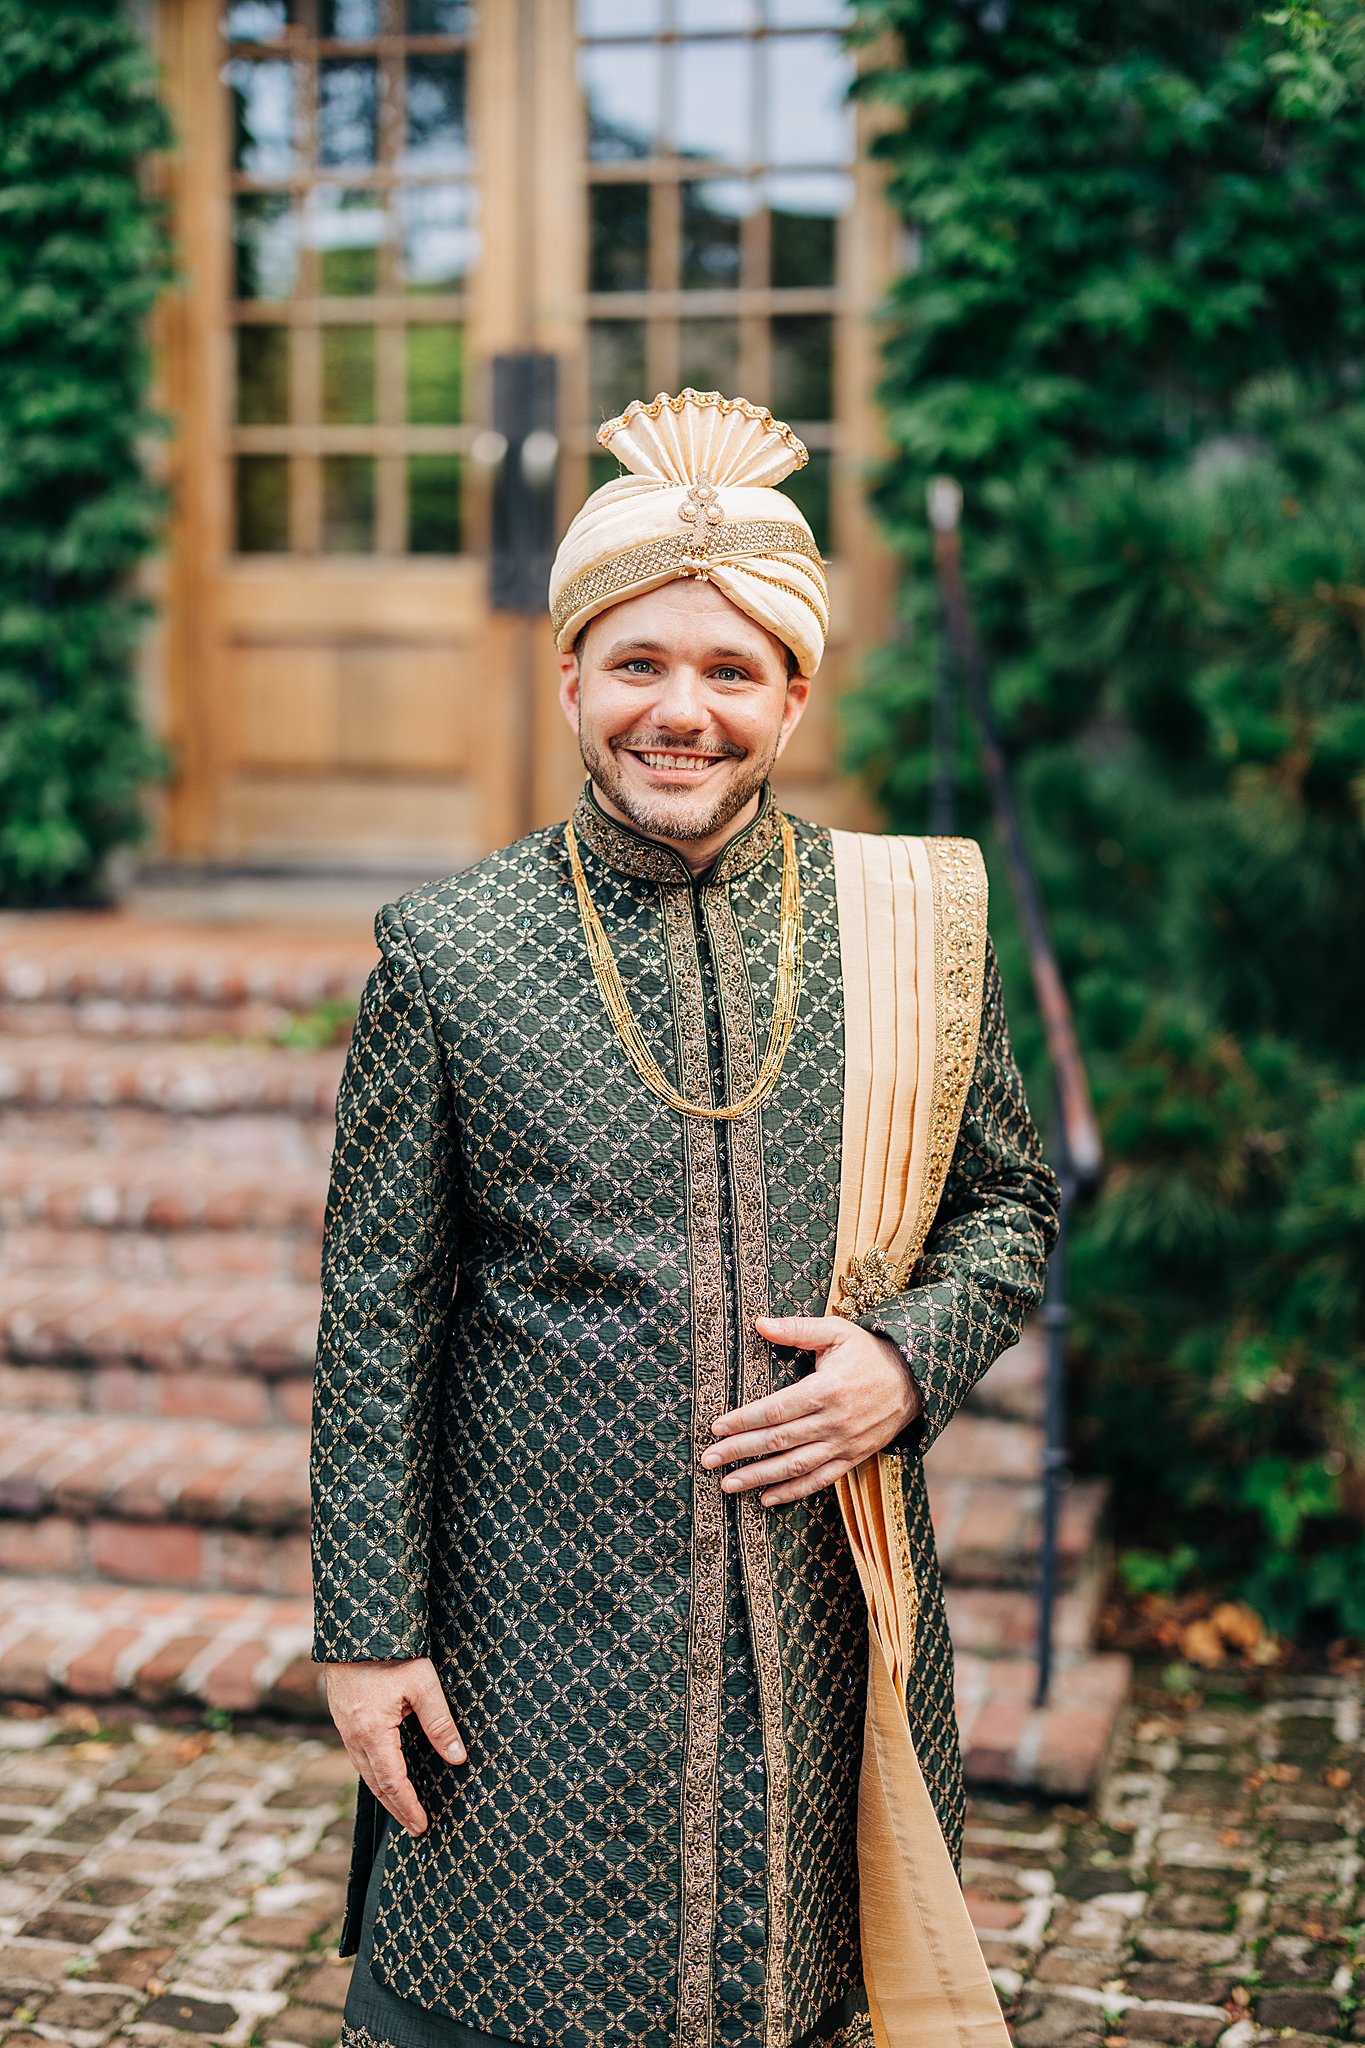 A groom in traditional indian wedding outfit stands in a garden path